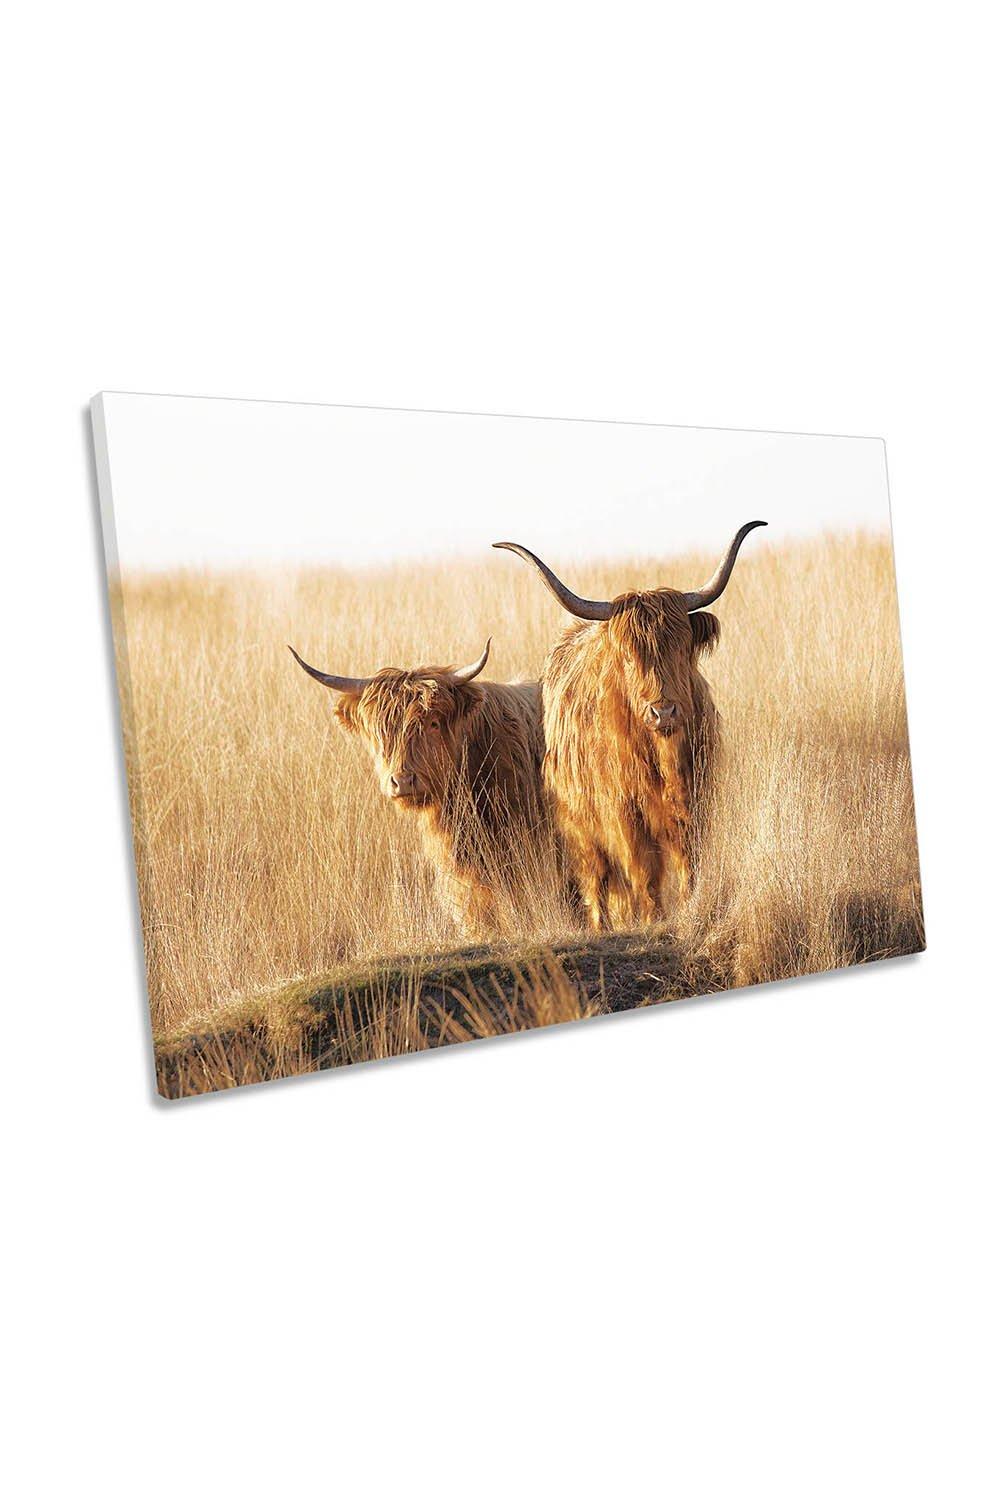 Young and Old Highland Cows Scottish Canvas Wall Art Picture Print